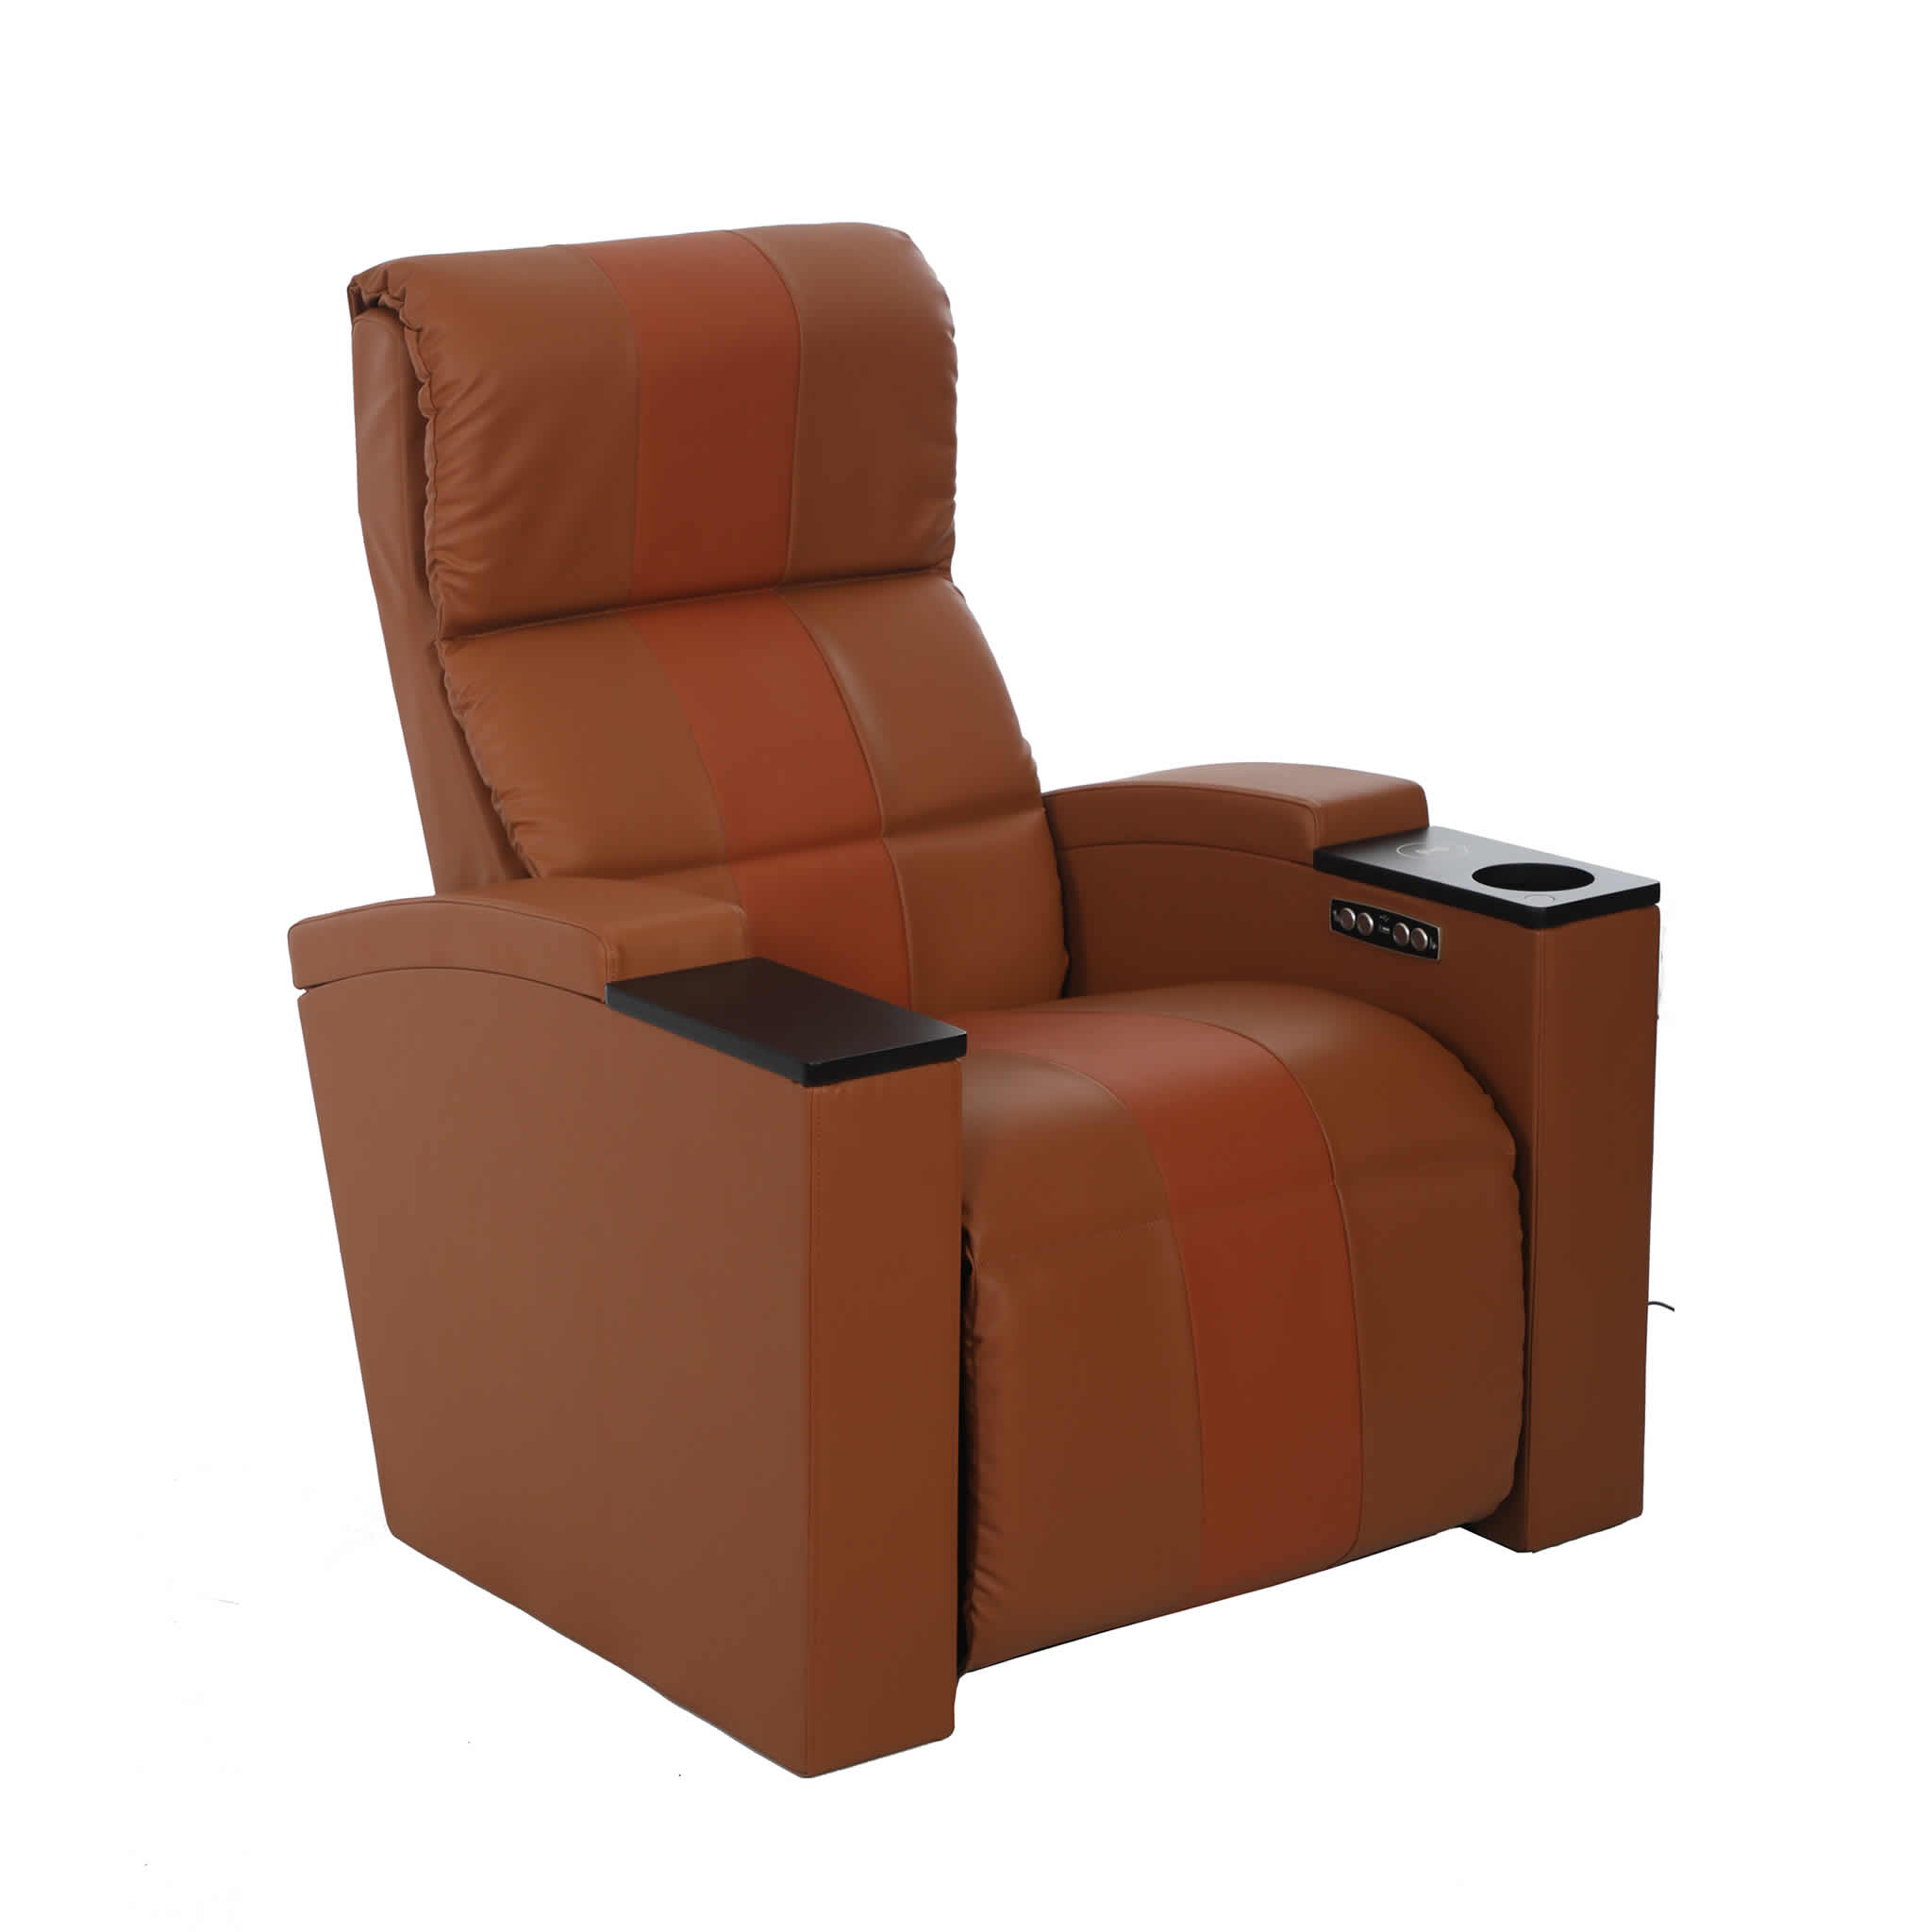 Simko Seating Products Recliner Cinema Seat Monstone 05